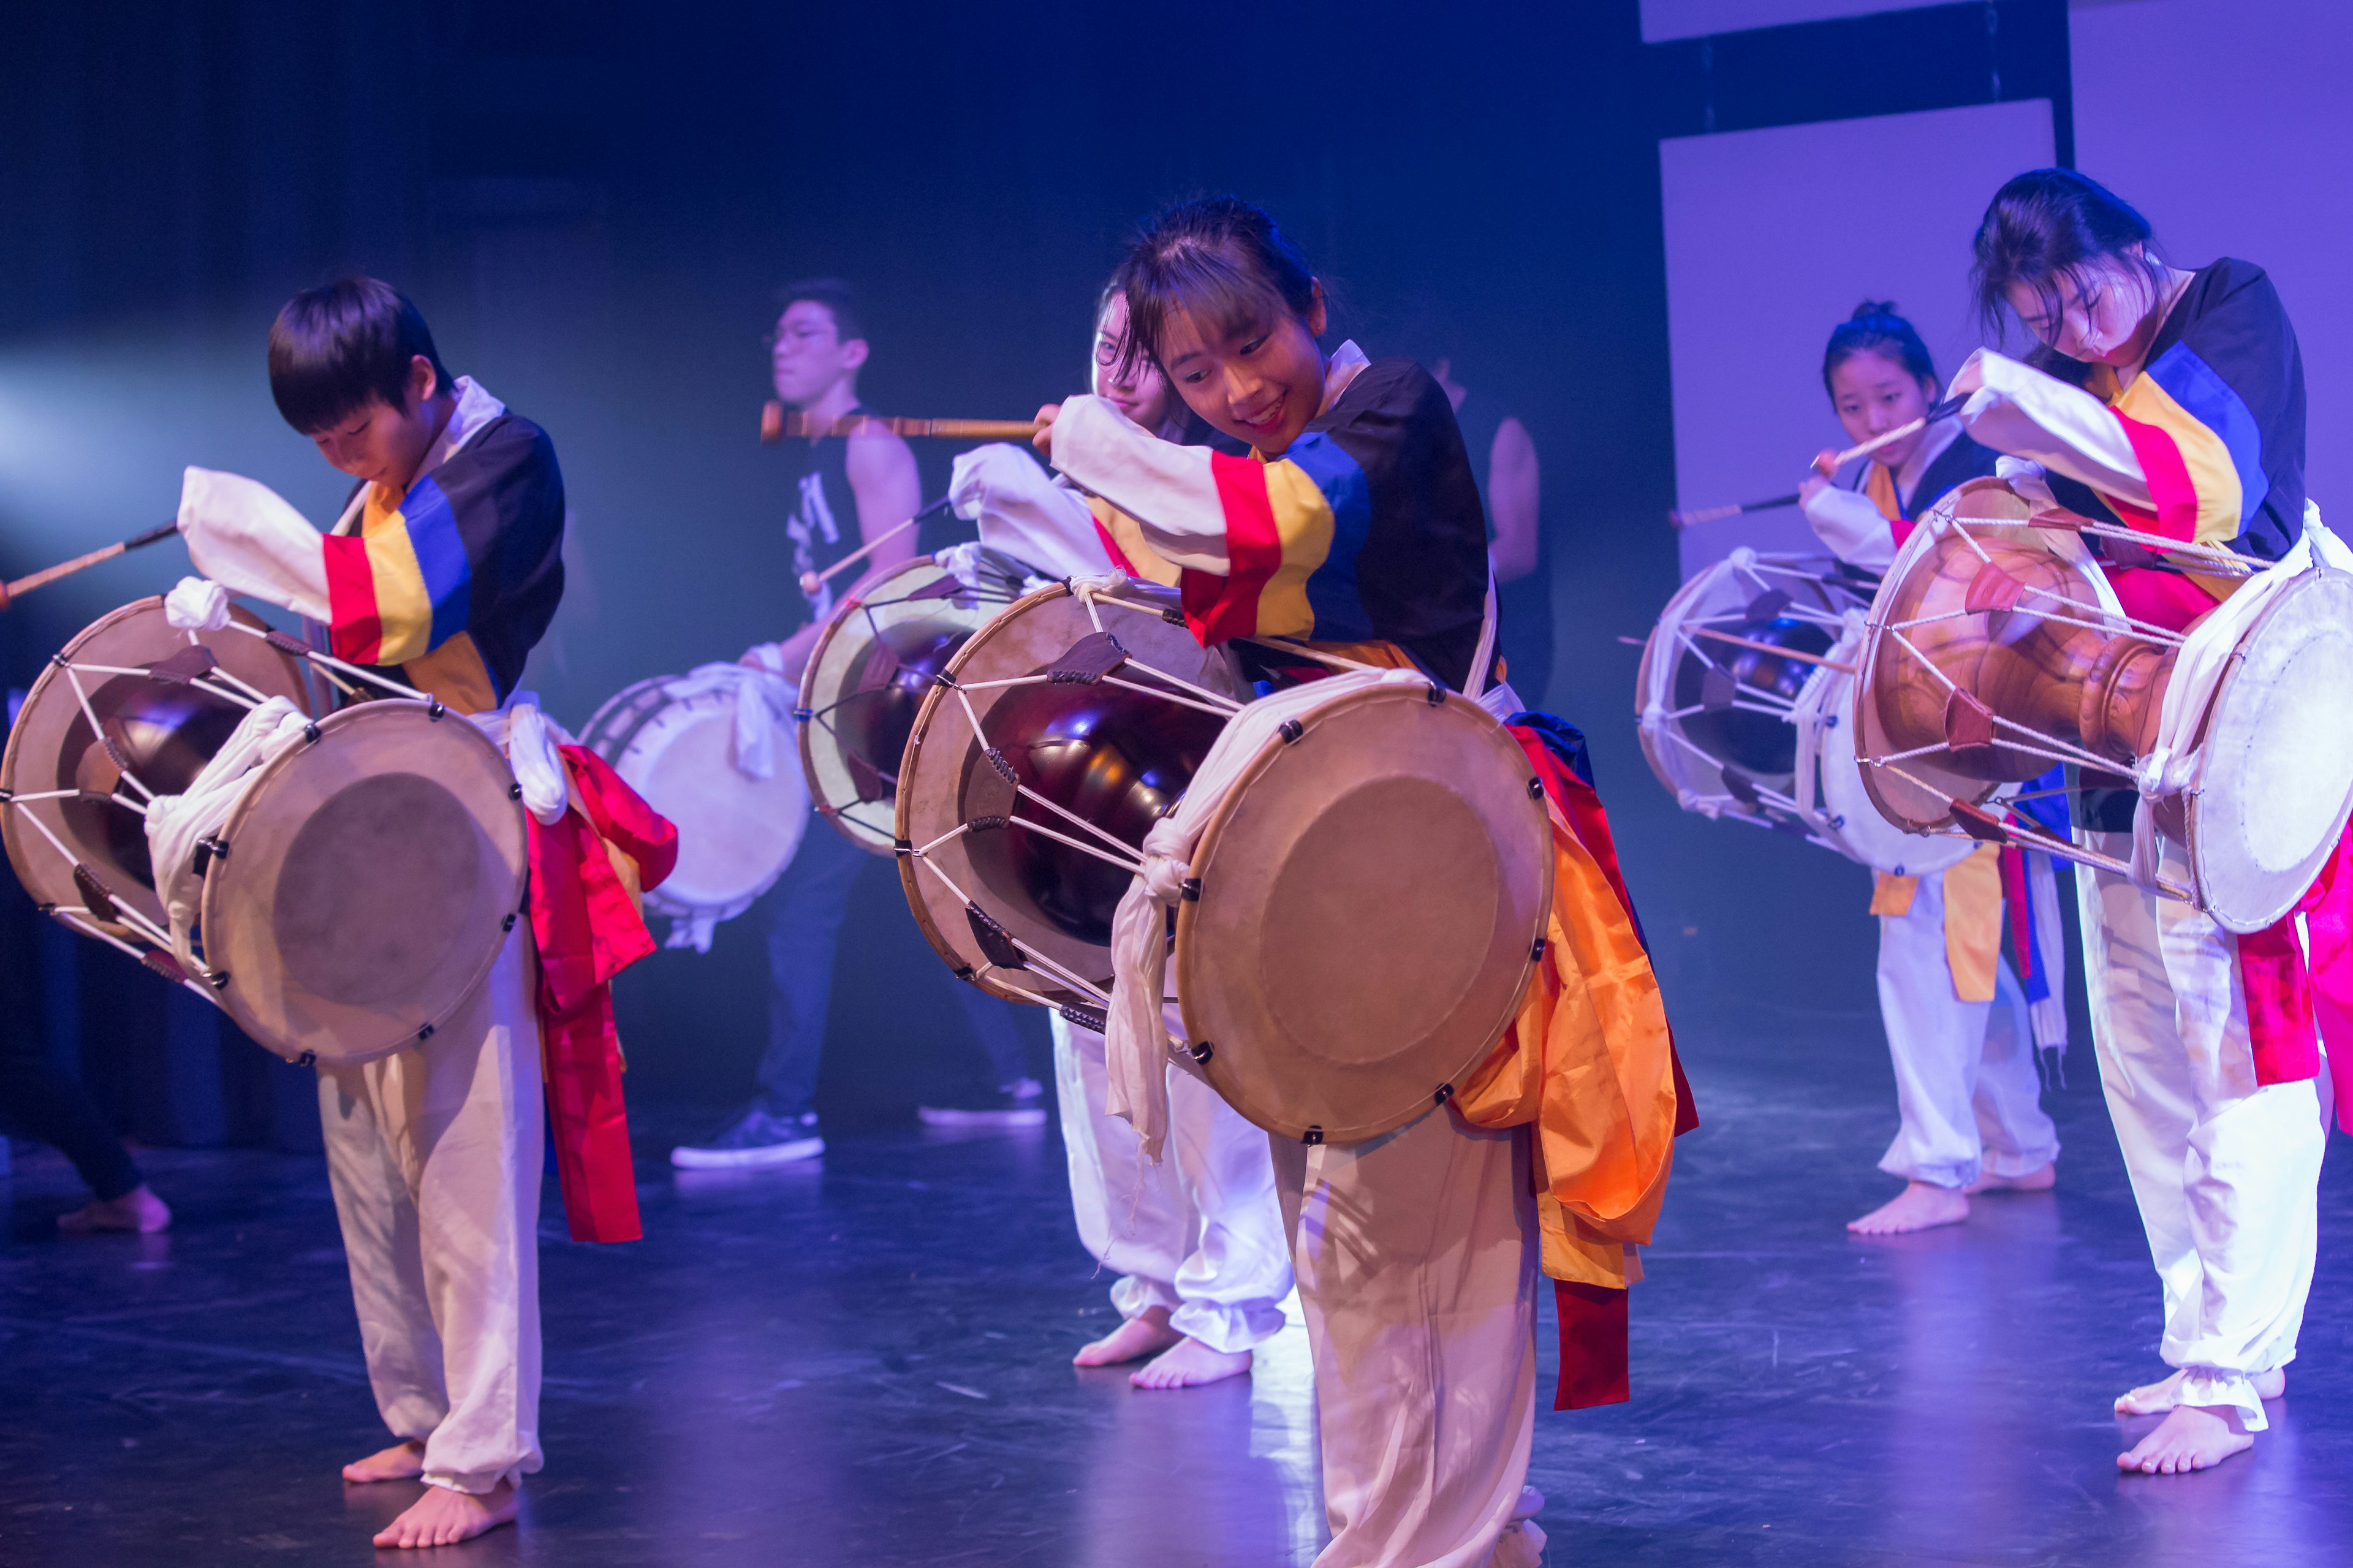 Three students are playing music on large drums